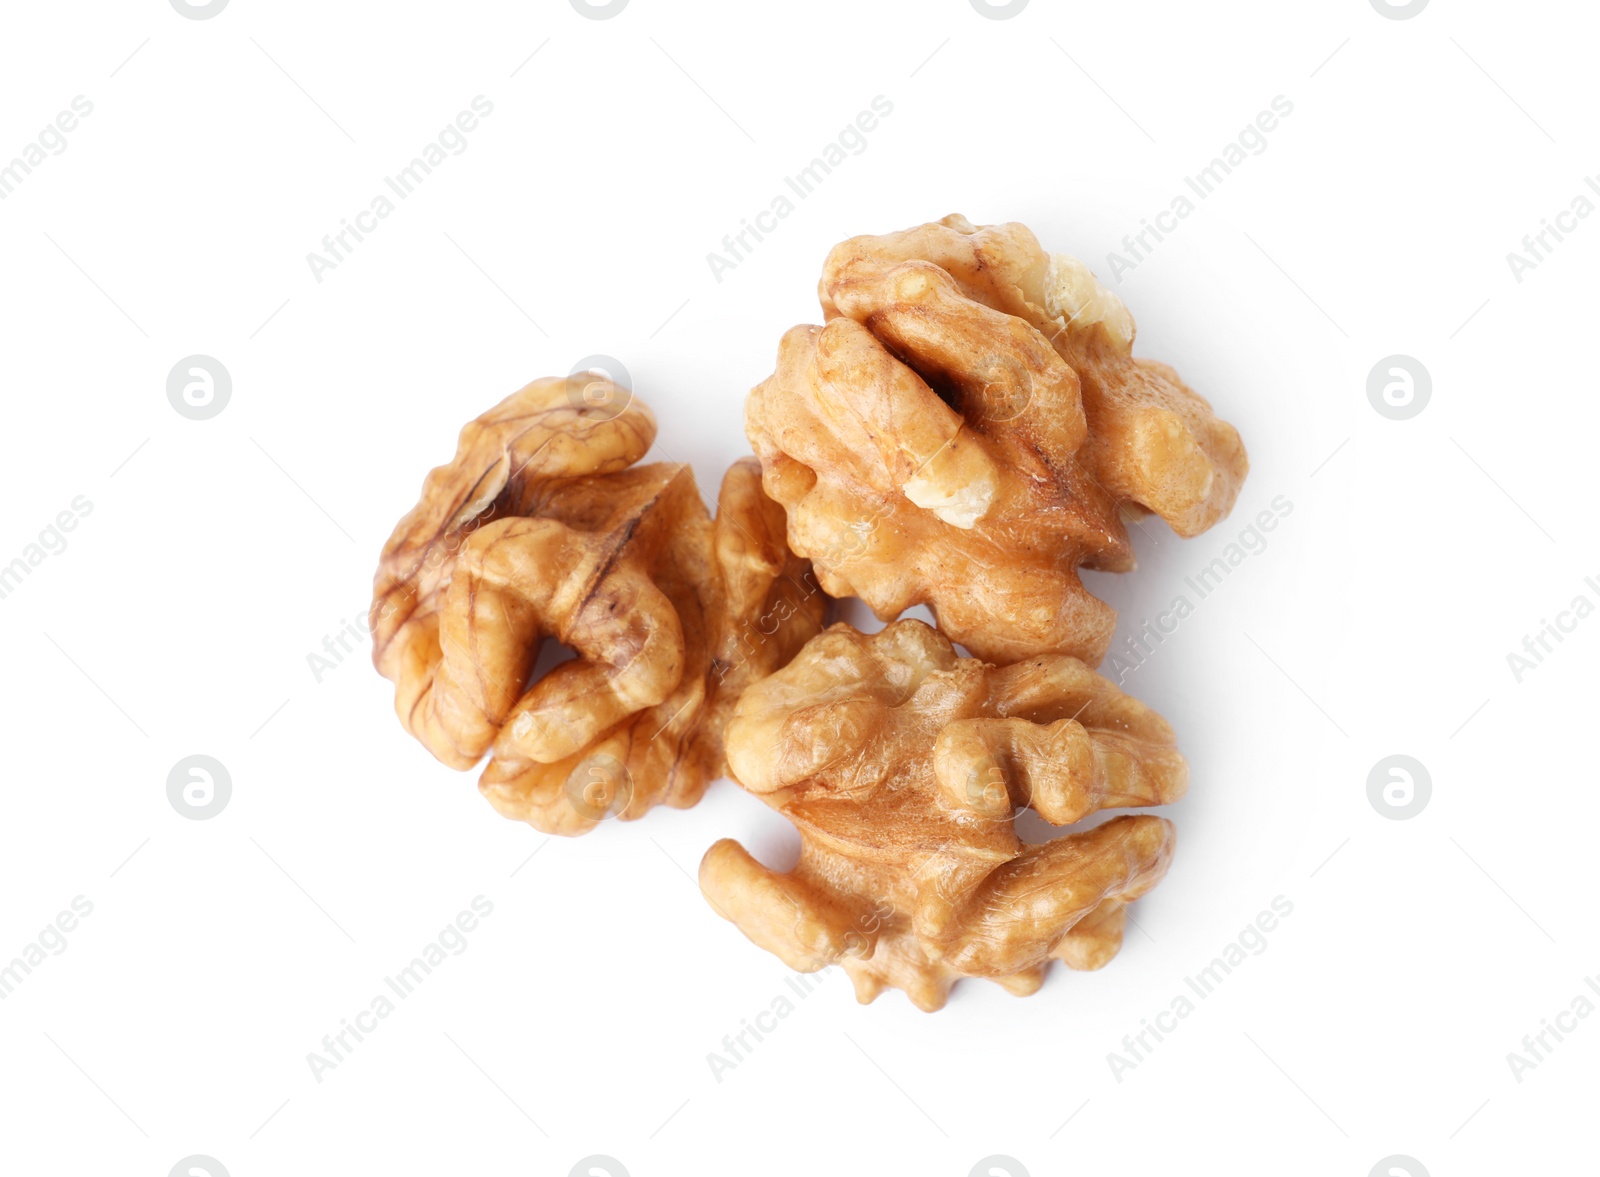 Photo of Tasty walnuts on white background, top view